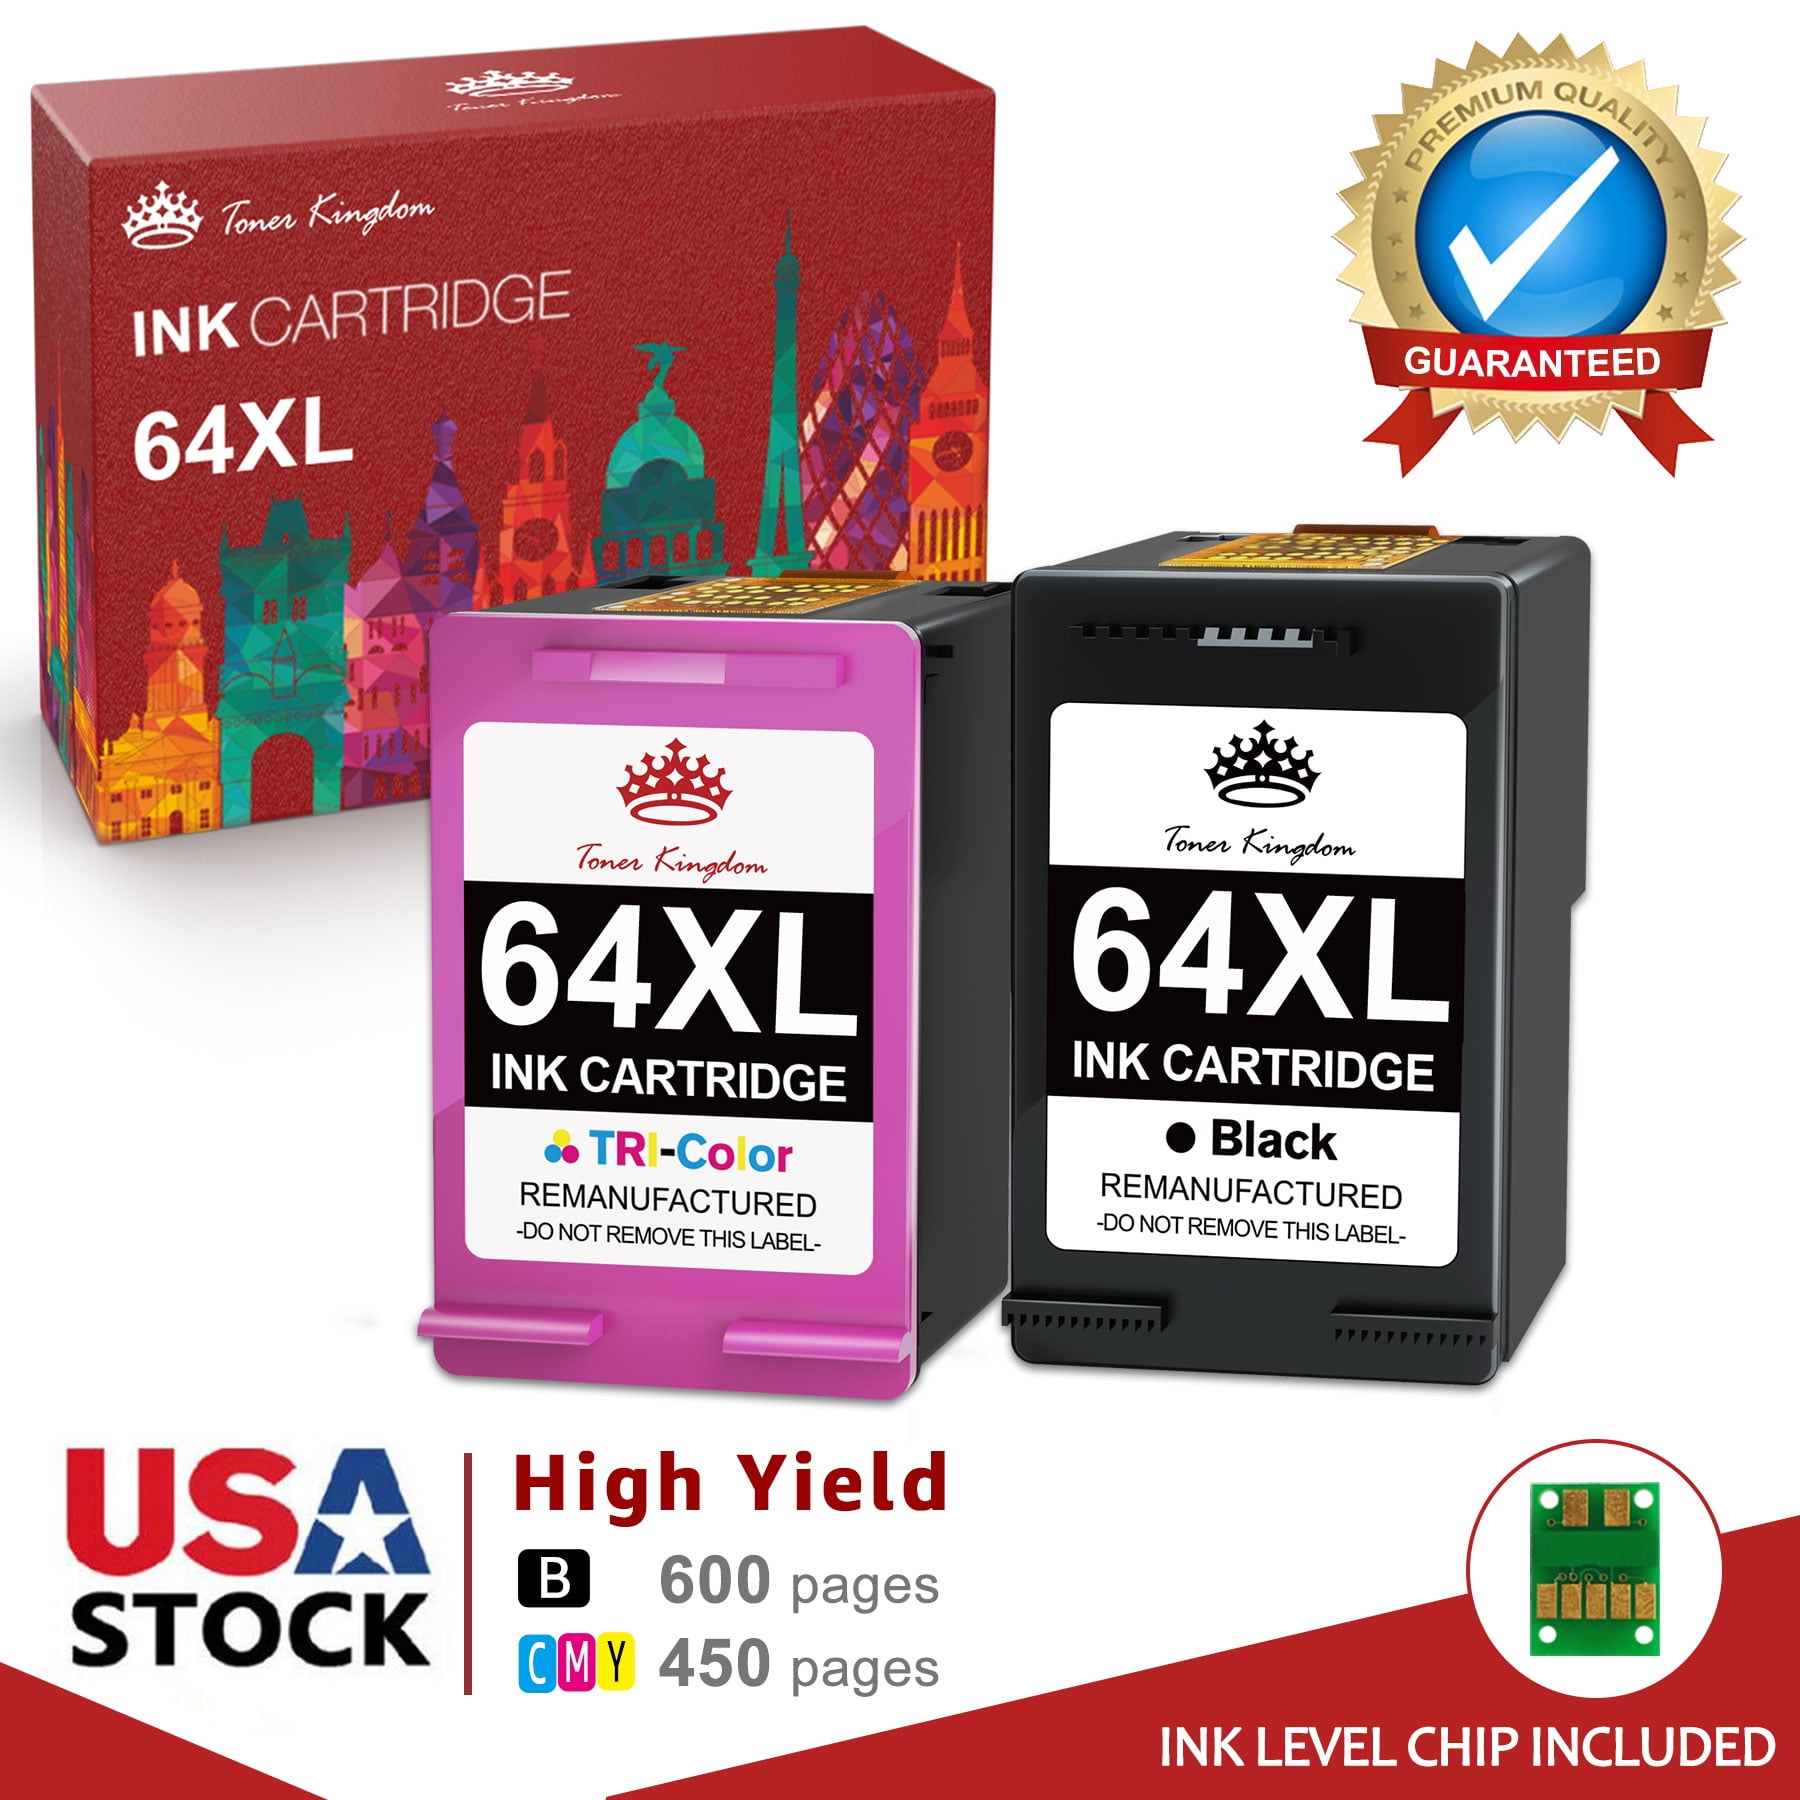 Genuine HP 303 / 303XL Black and Colour Ink Cartridges for Envy Photo 6230  7130 